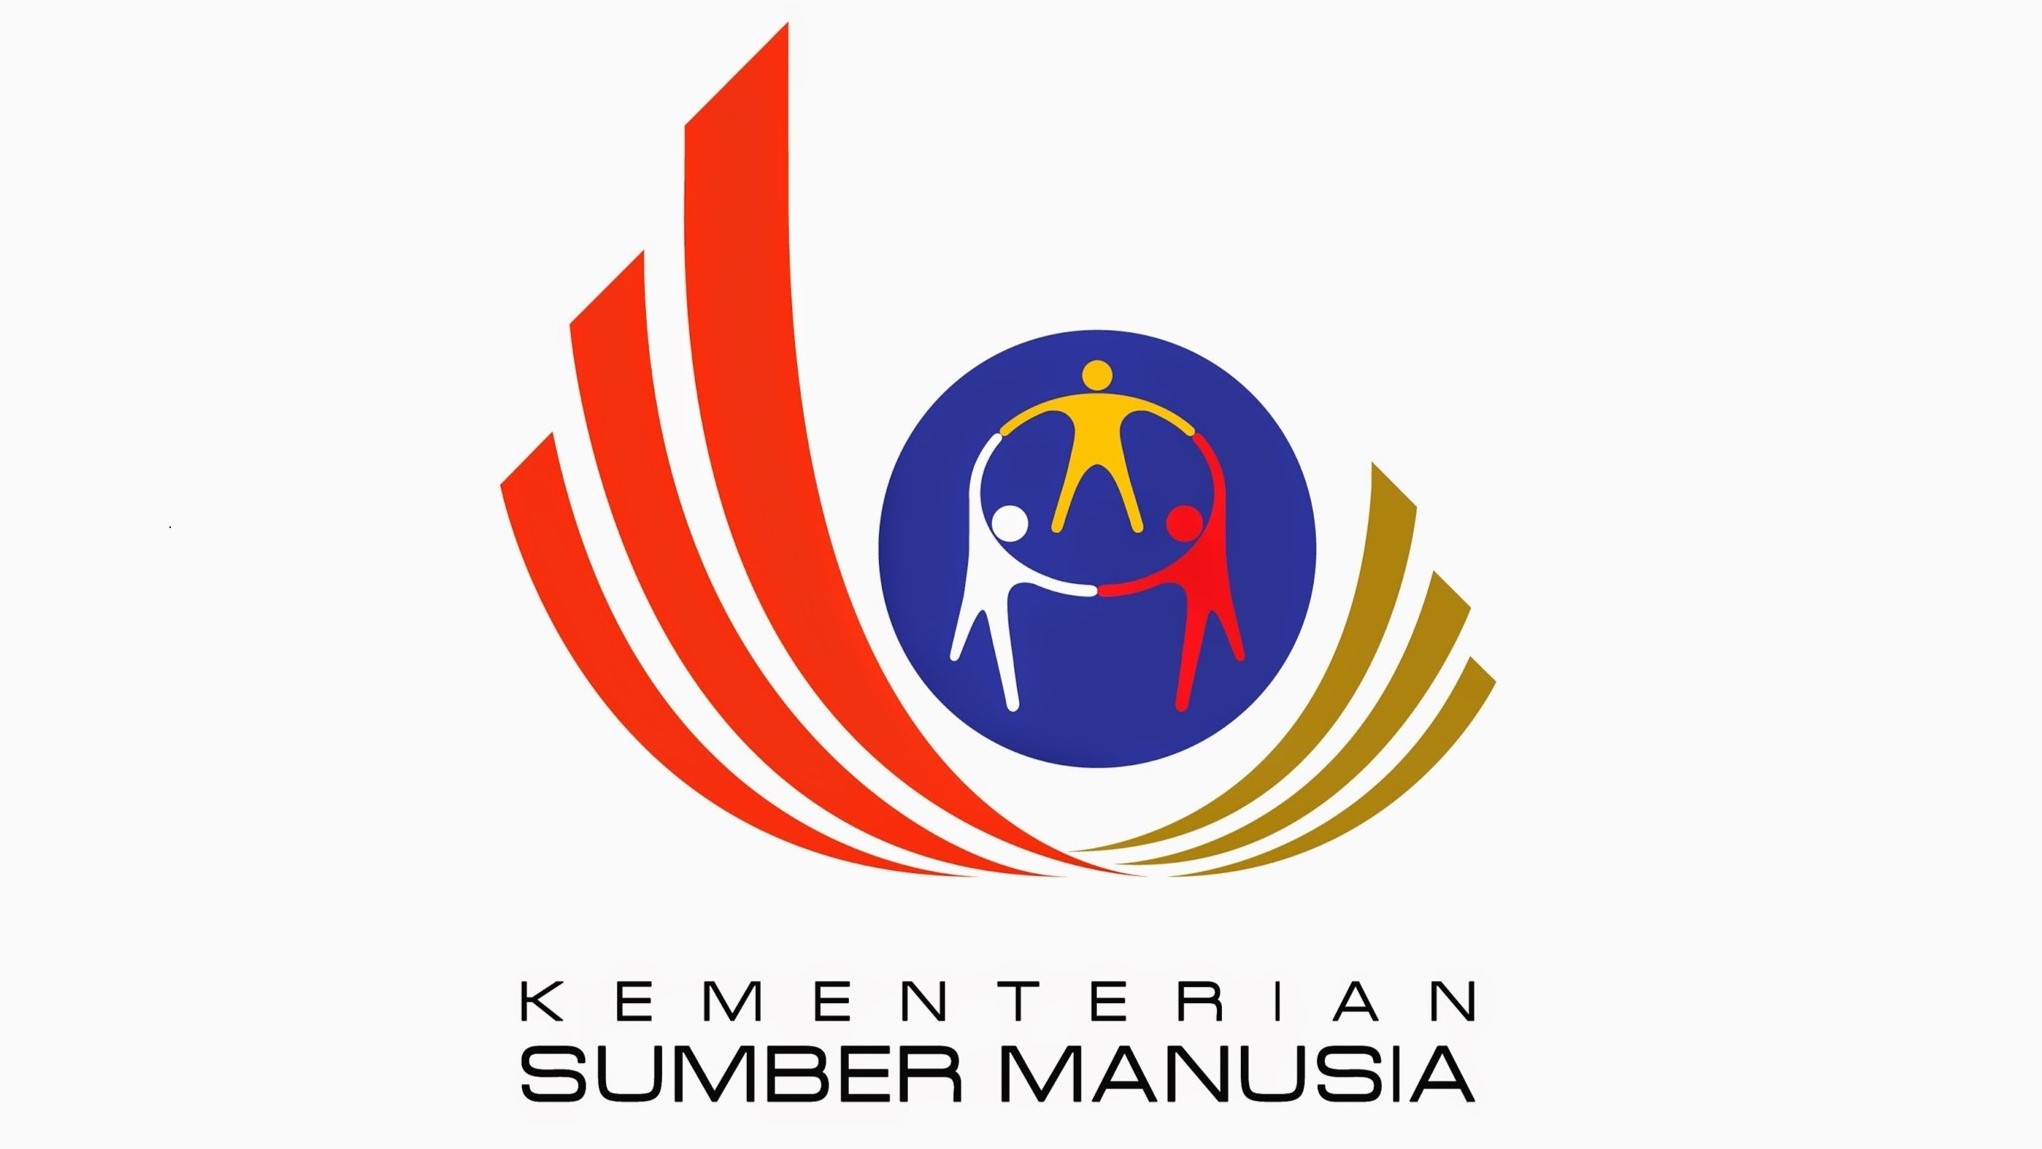 HR Ministry to use ‘Kesuma’ as new official acronym from tomorrow